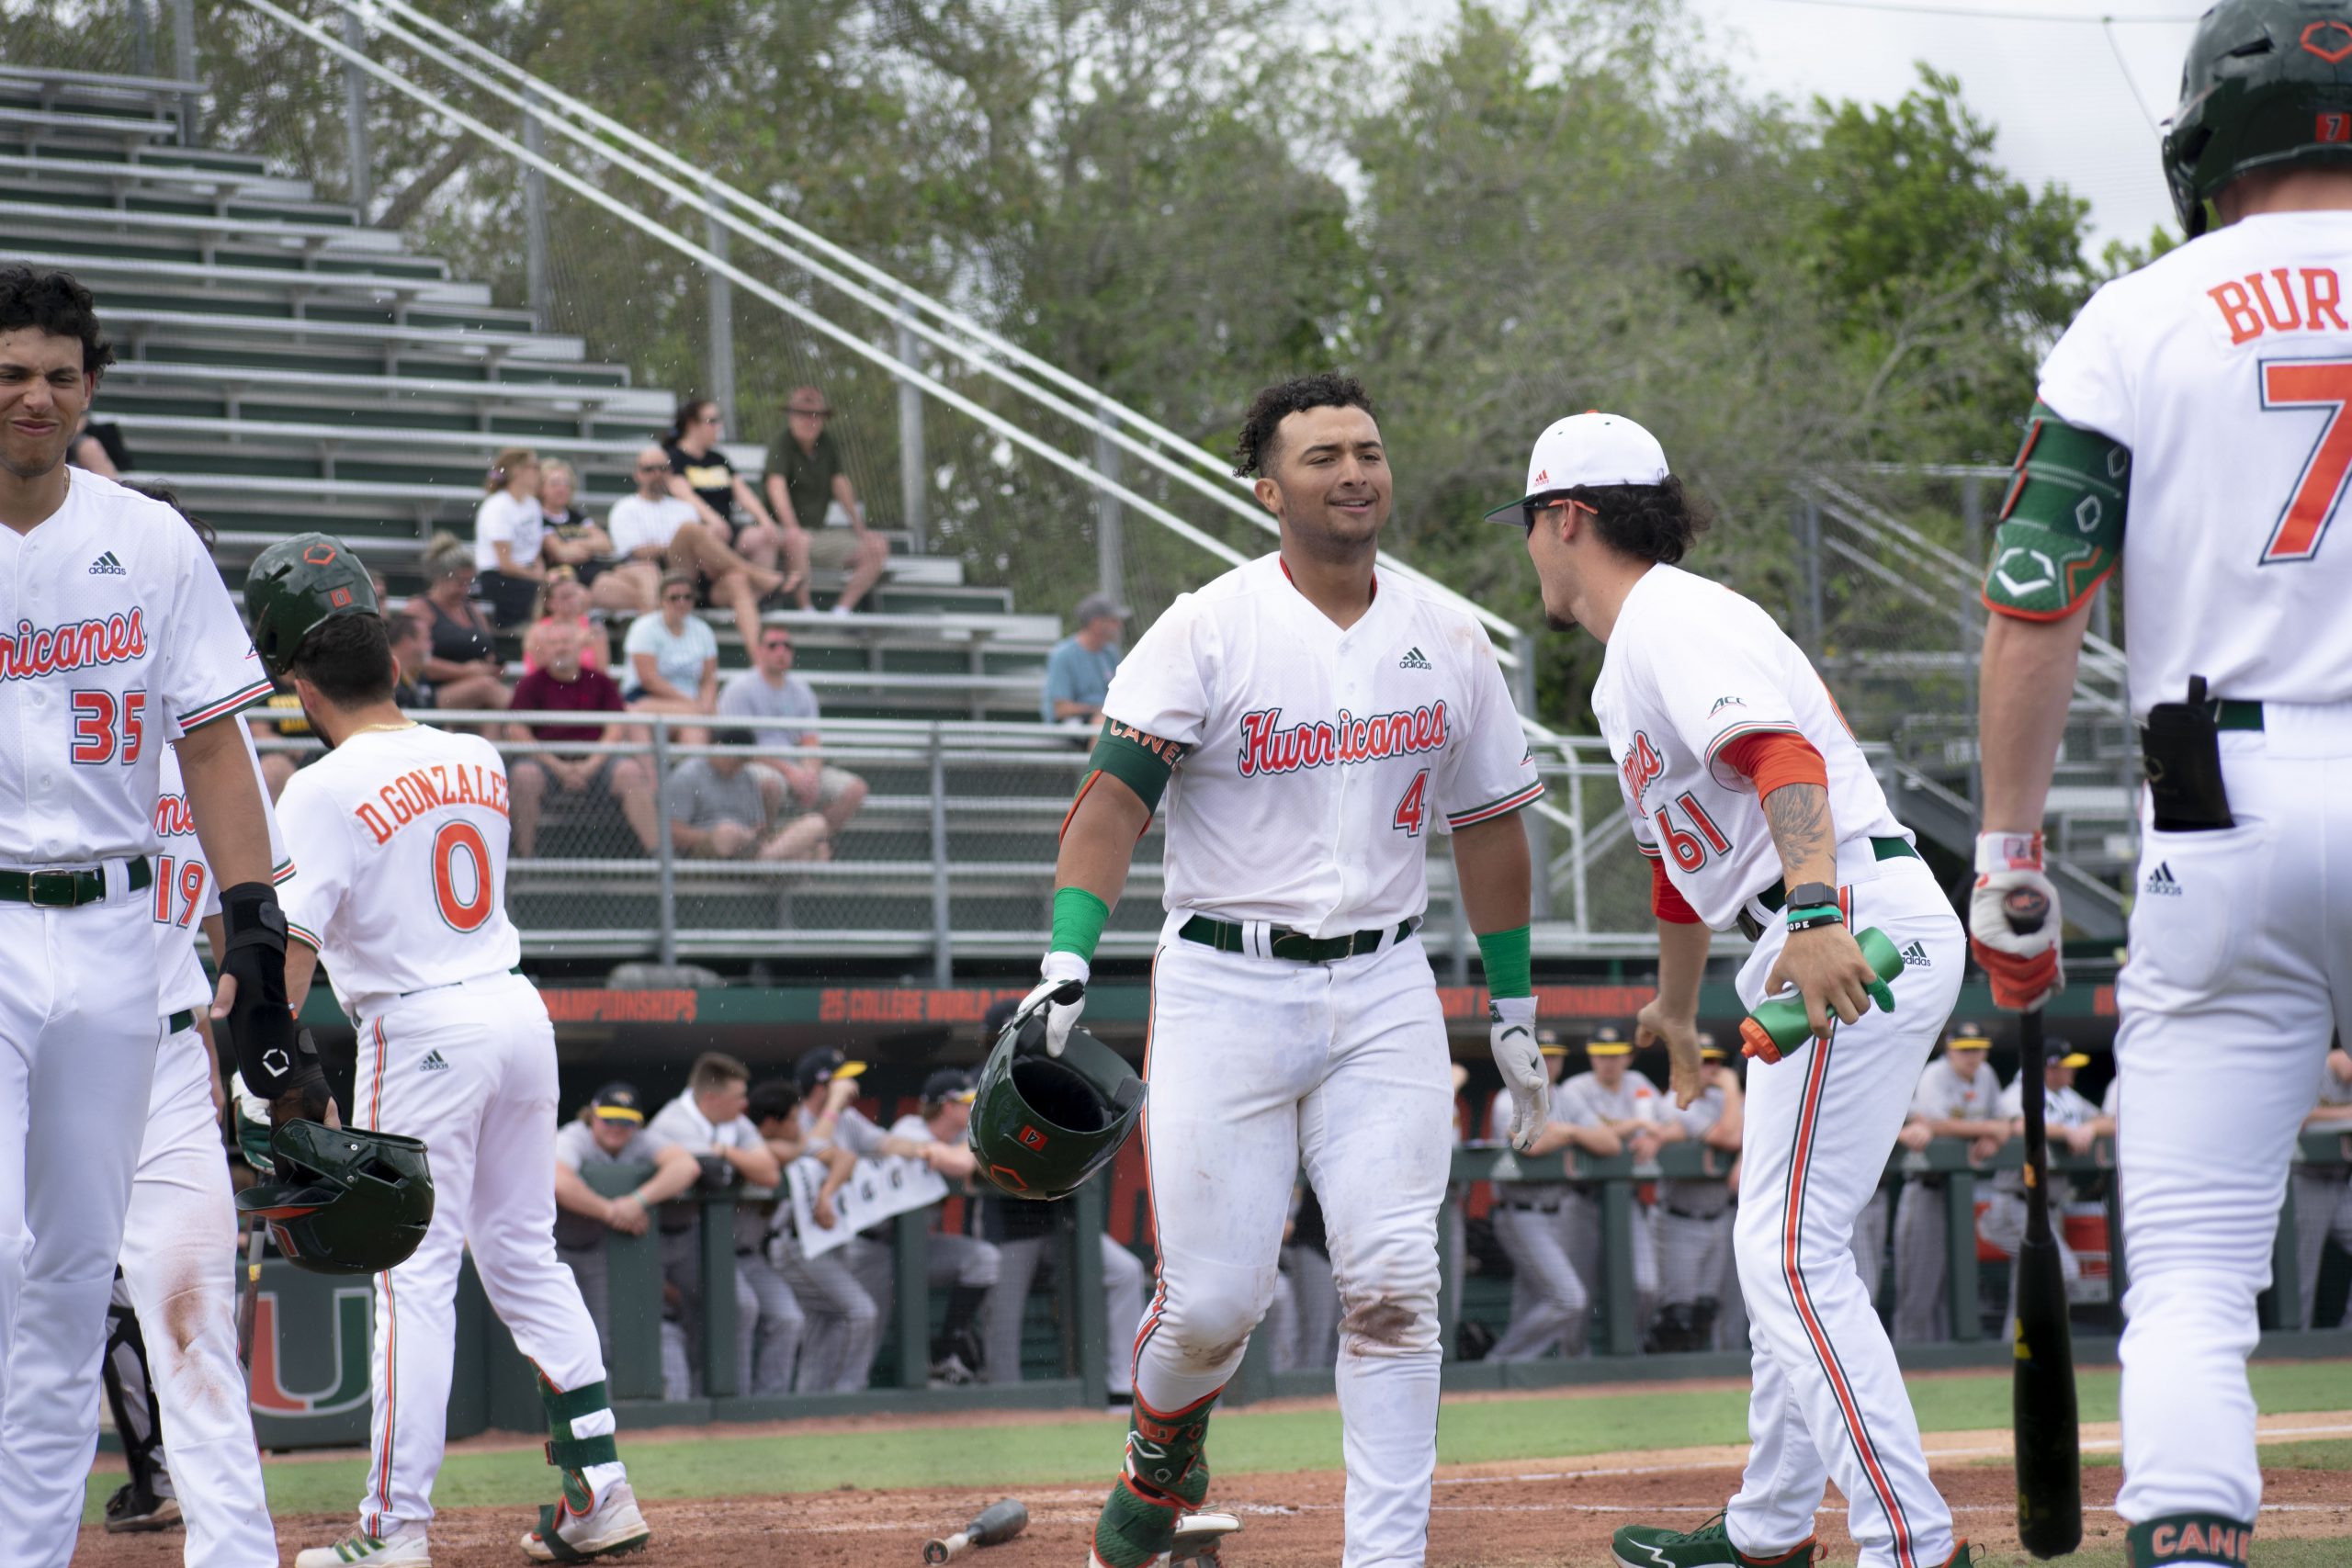 Miami baseball completes week undefeated after sweeping Towson